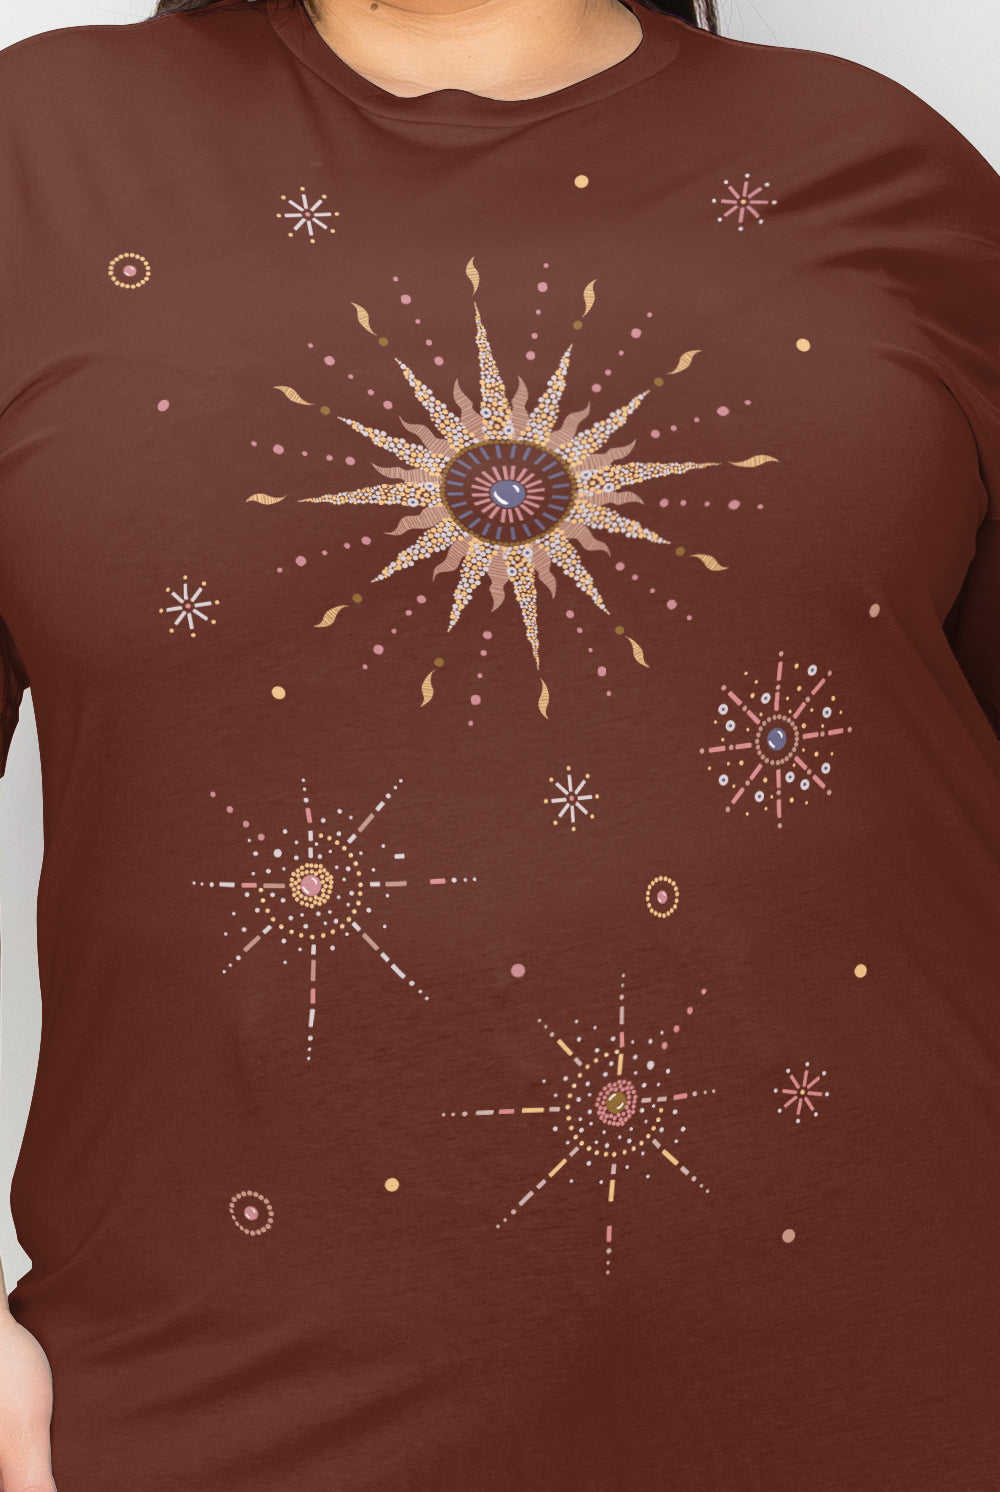 close up of the full size constellation t-shirt from Gem Threads Boutique